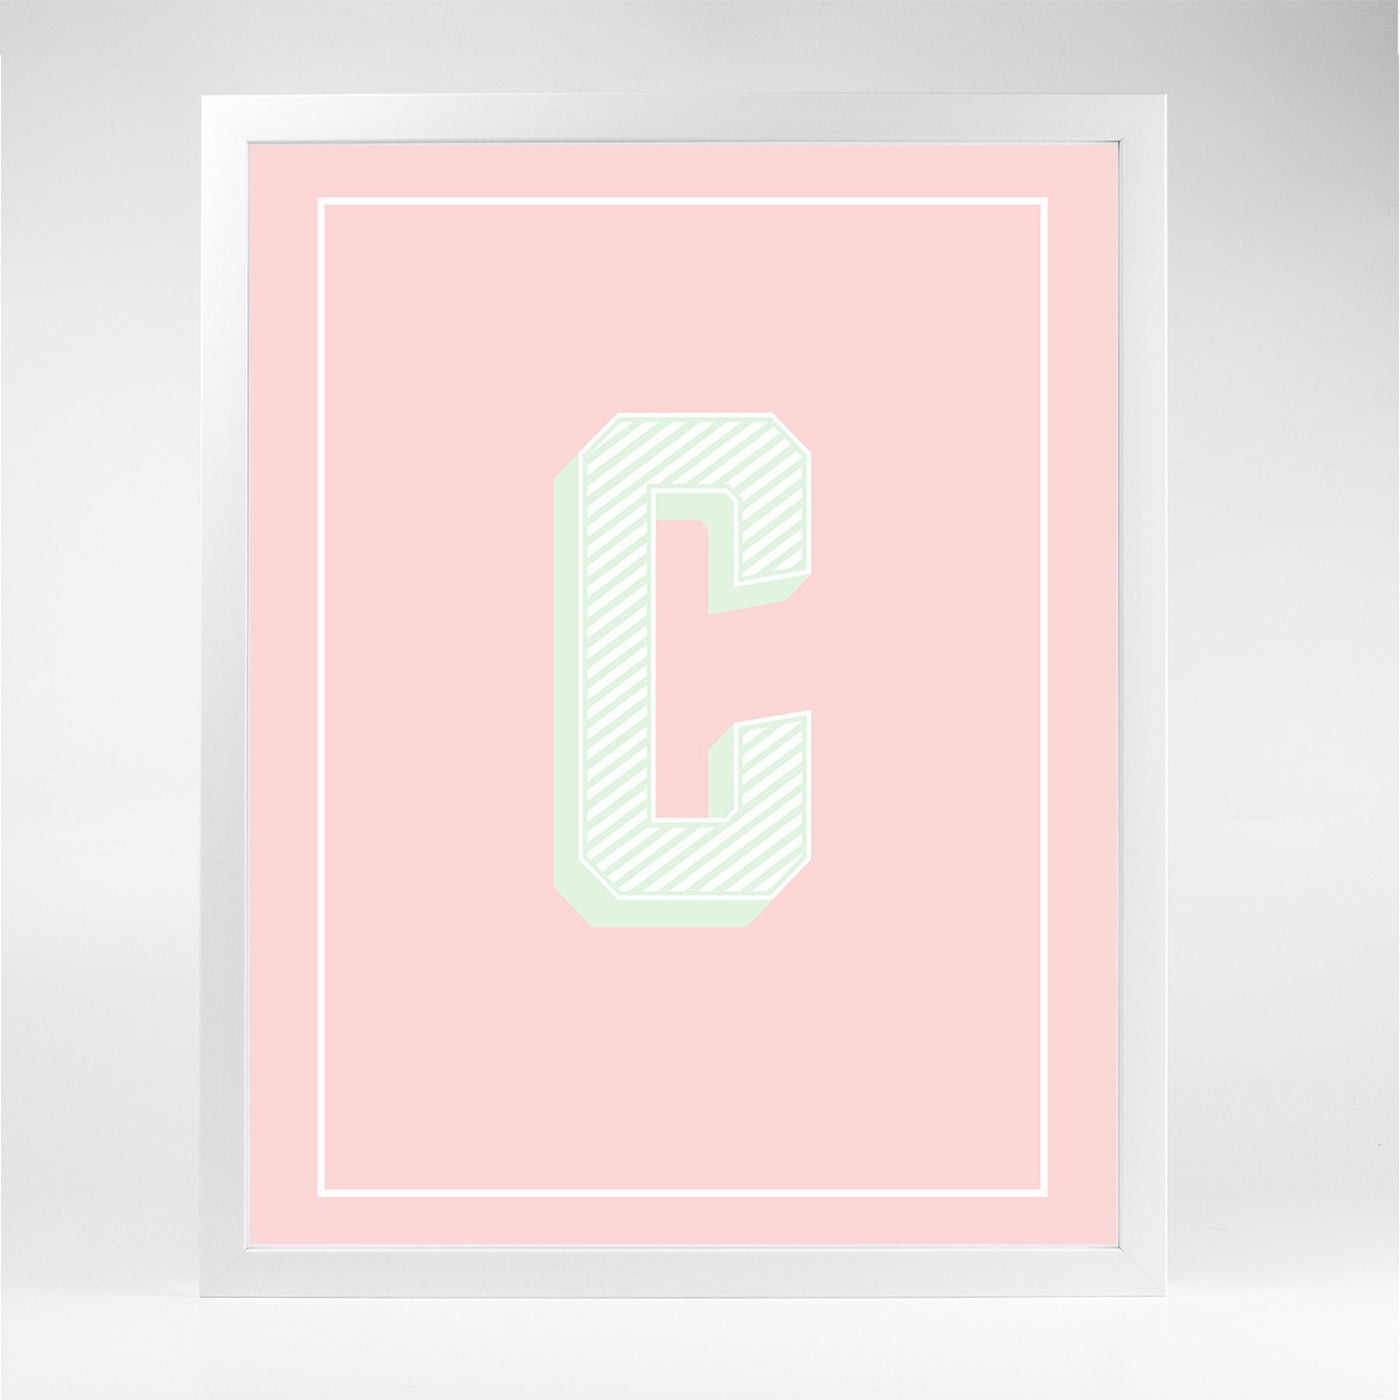 Gallery Prints C The Letter Series Katie Kime